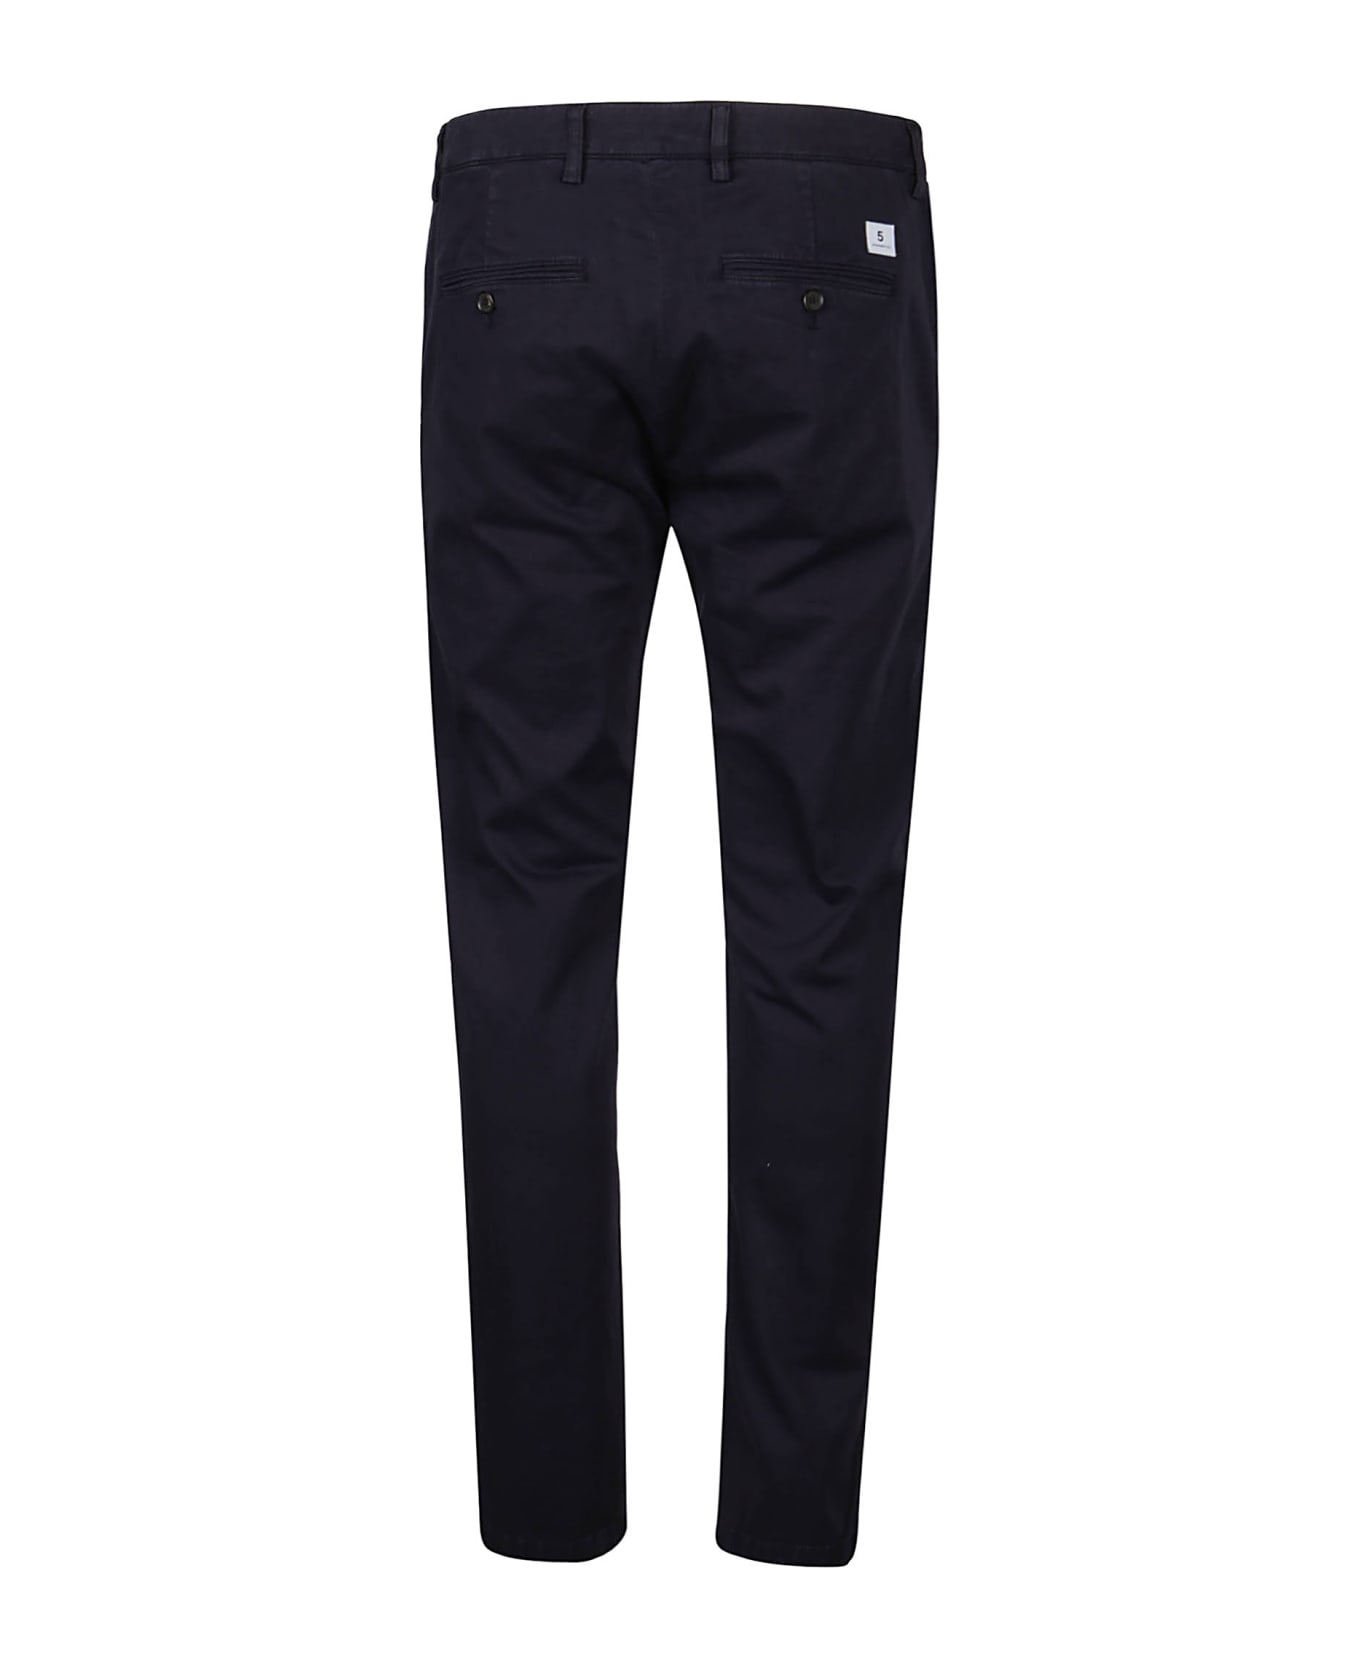 Department Five Mike Chinos Superslim Pant - Navy ボトムス